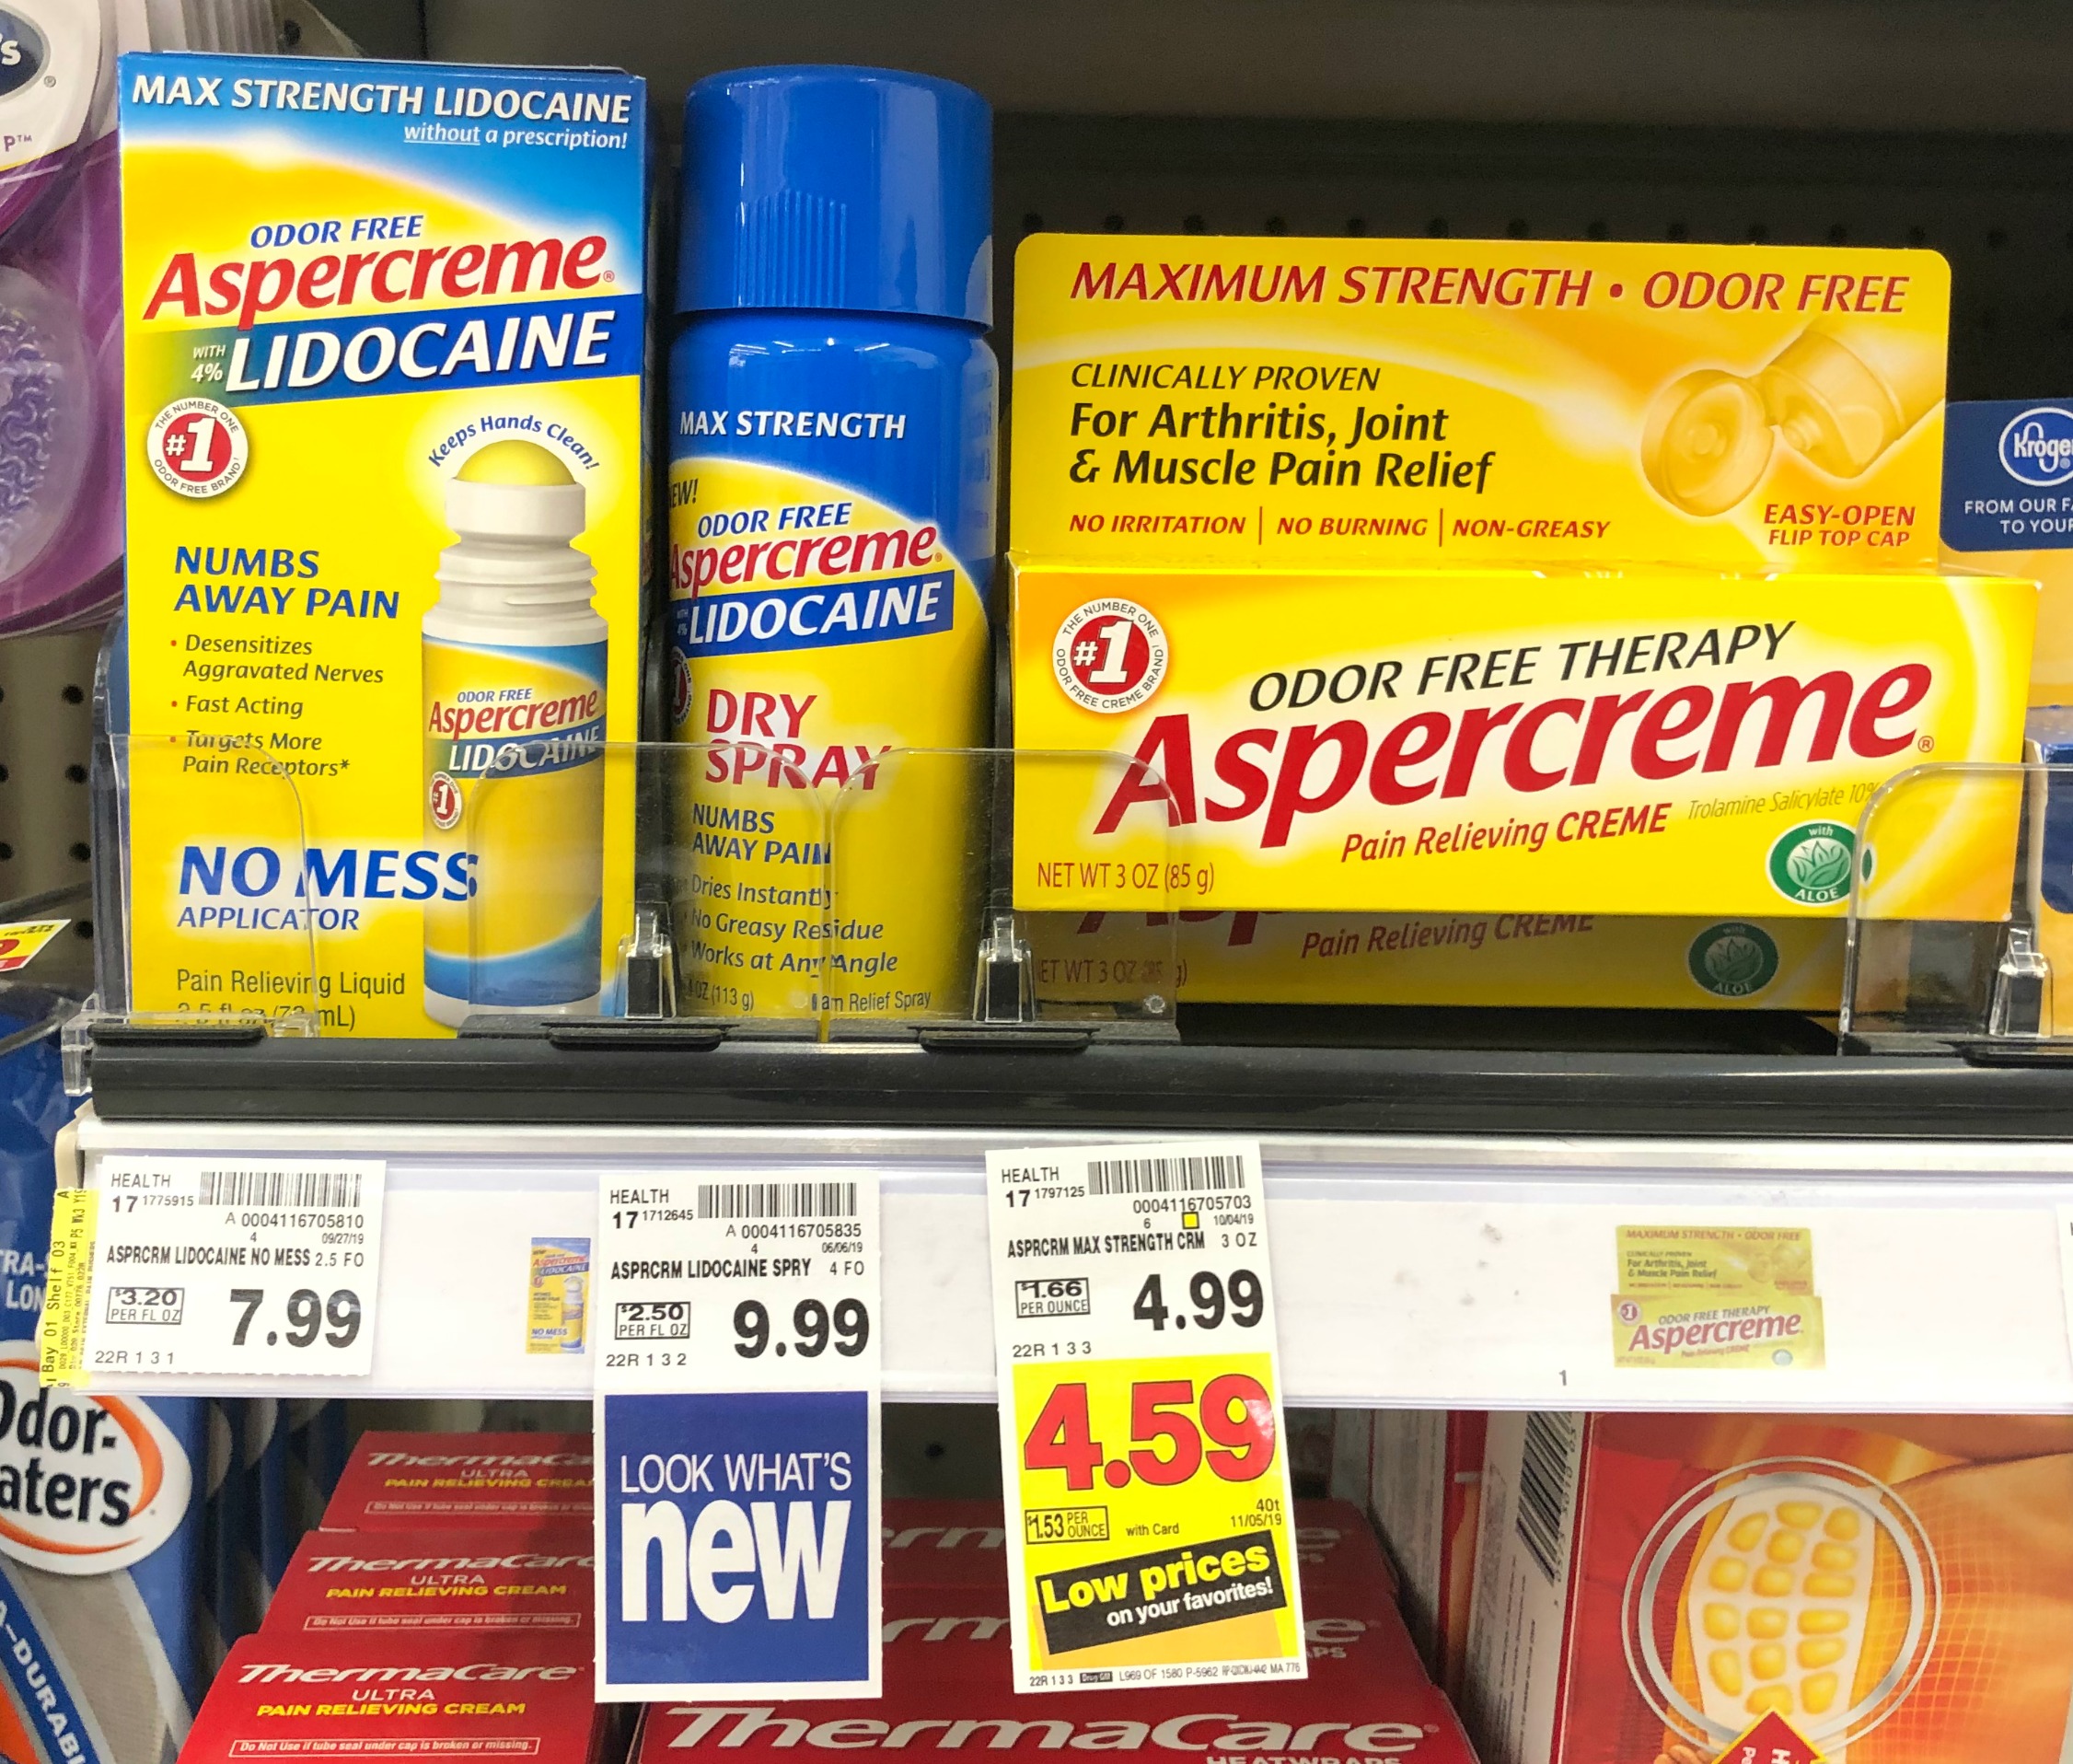 NEW Aspercreme Coupons Odor Free Therapy Items as low as 3.34 at